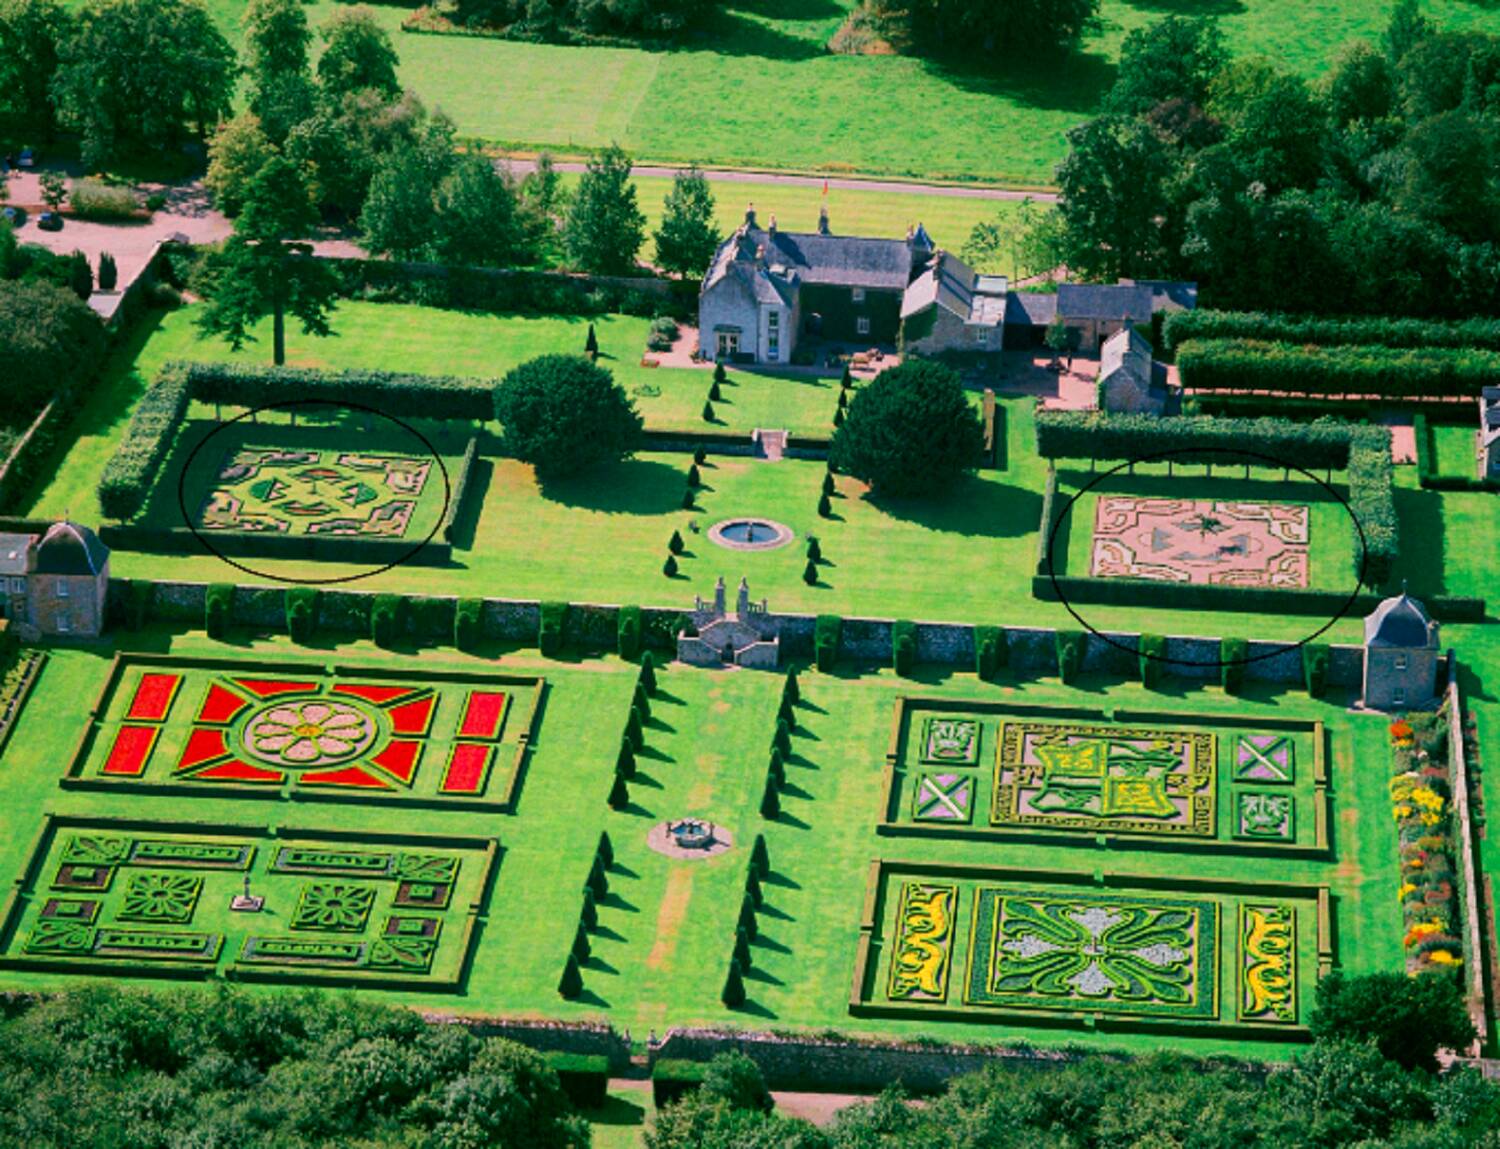 An aerial view of Pitmedden Garden, revealing the 6 distinct and colourful parterre gardens. A large stone house stands at the far end of the garden with tall trees around the perimeter.